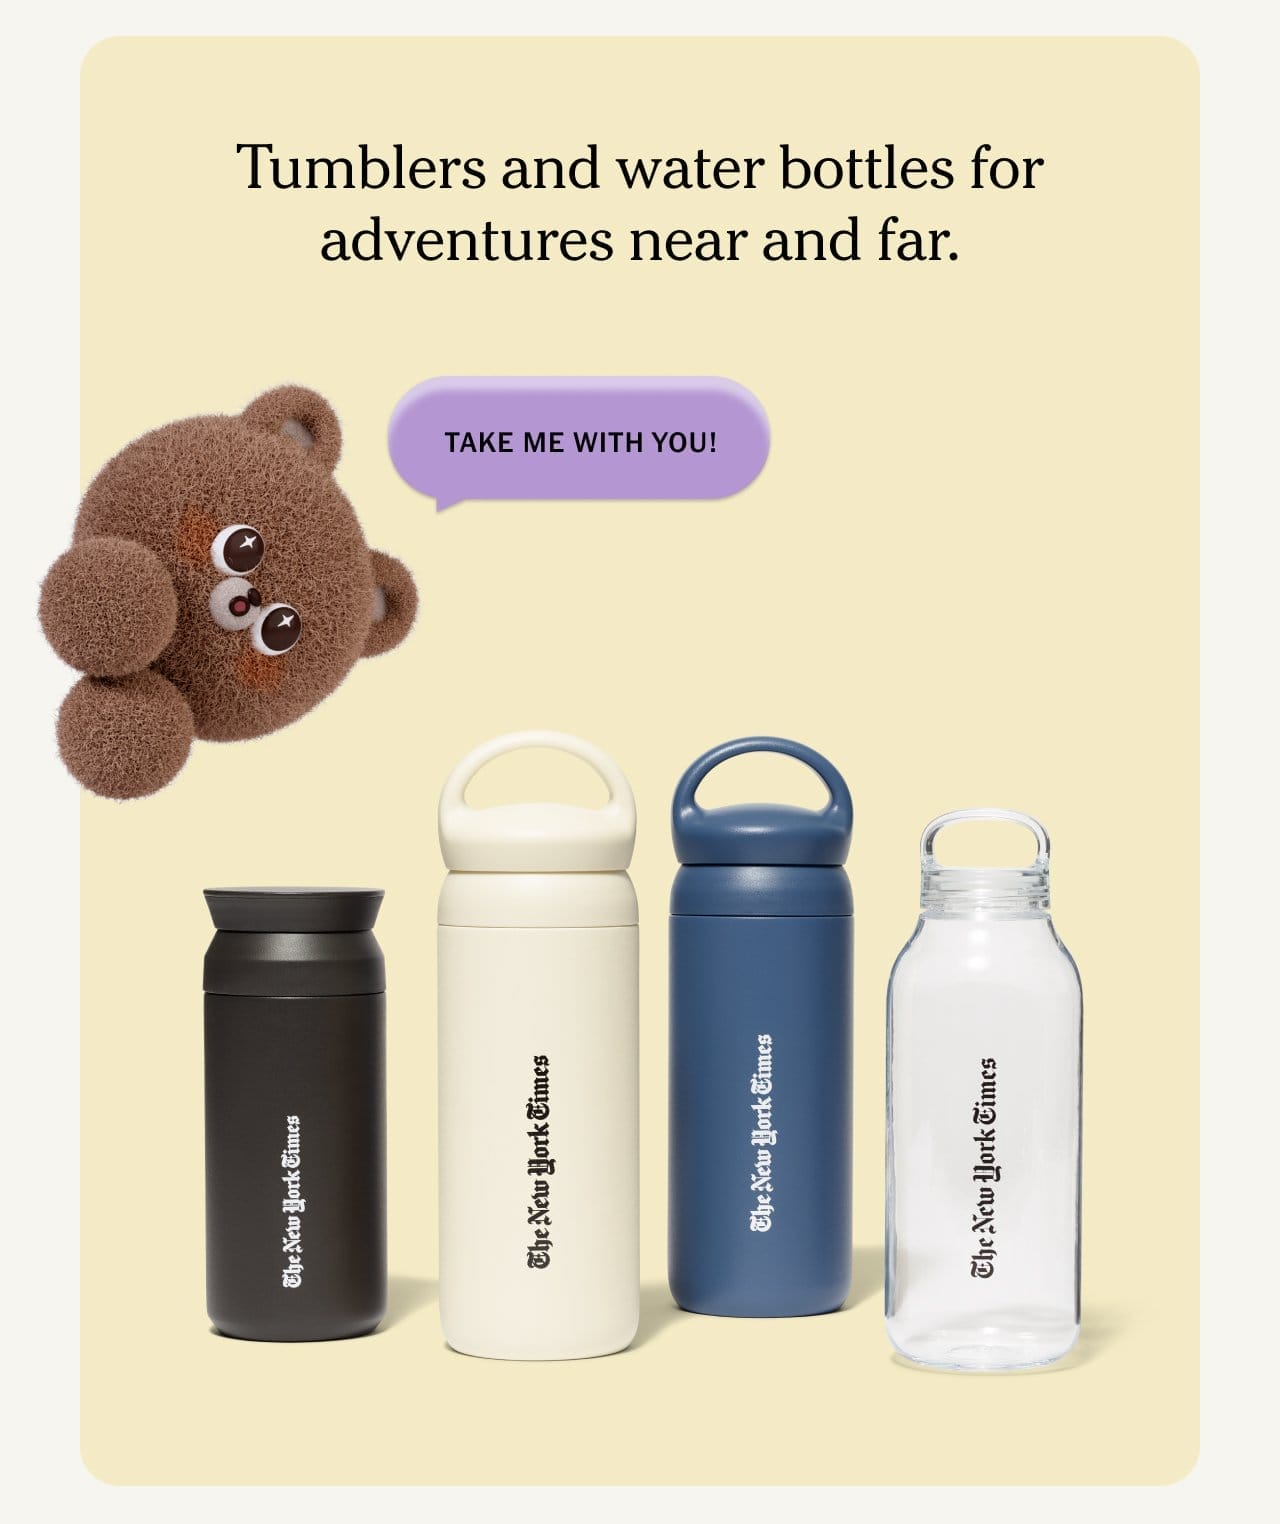 Tumblers and water bottles for adventures near and far.